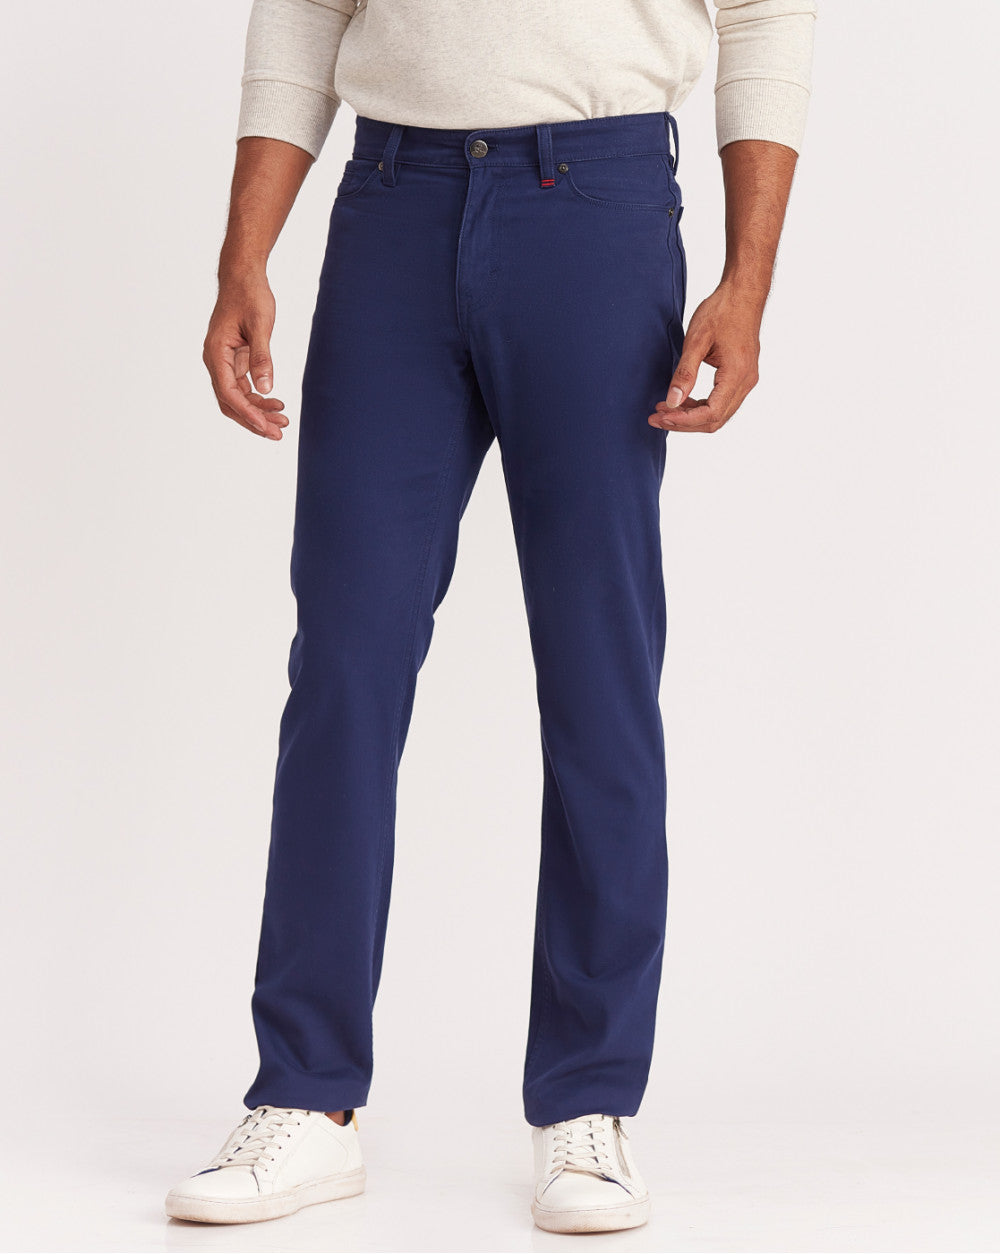 Straight Fit Five-Pocket Luxe Pants - Bright Navy